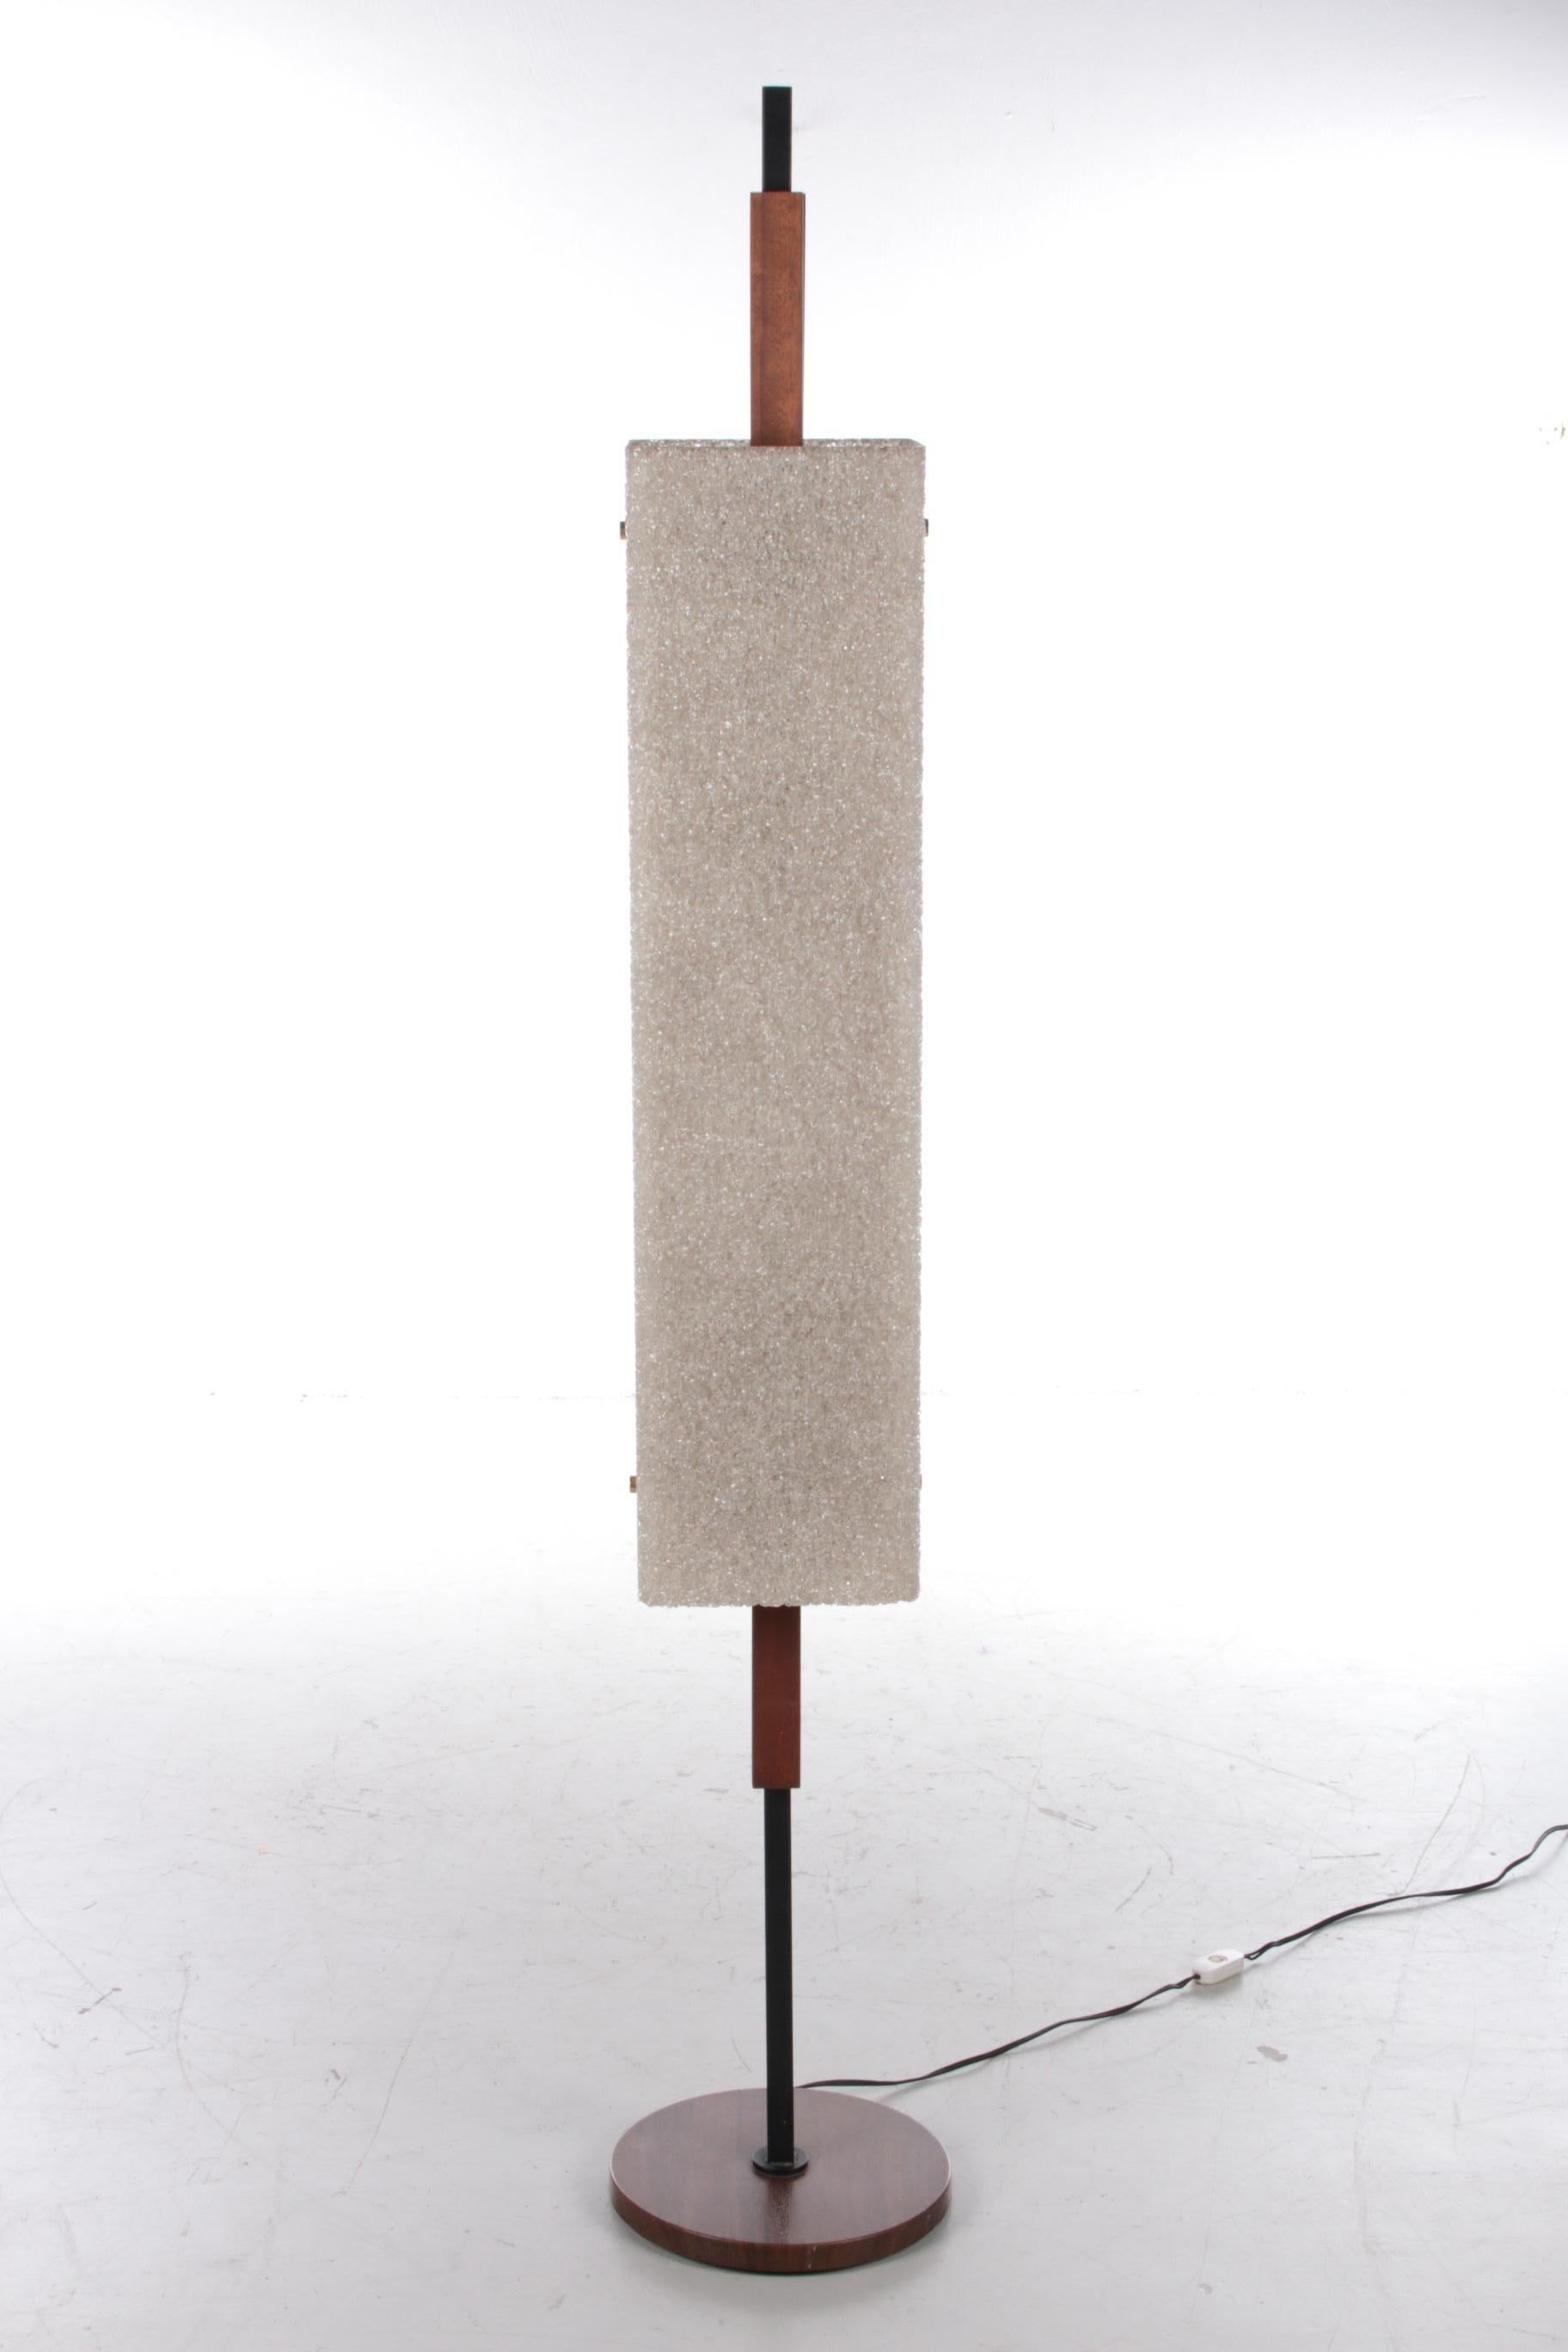 Beautiful vintage French floor lamp with switch, 1960s


Beautiful mid century 1960s floor lamp, made in France.

The base is made of wood with a metal base.

The shade is made of sugar-coated plastic with very nice dots, the lights that are